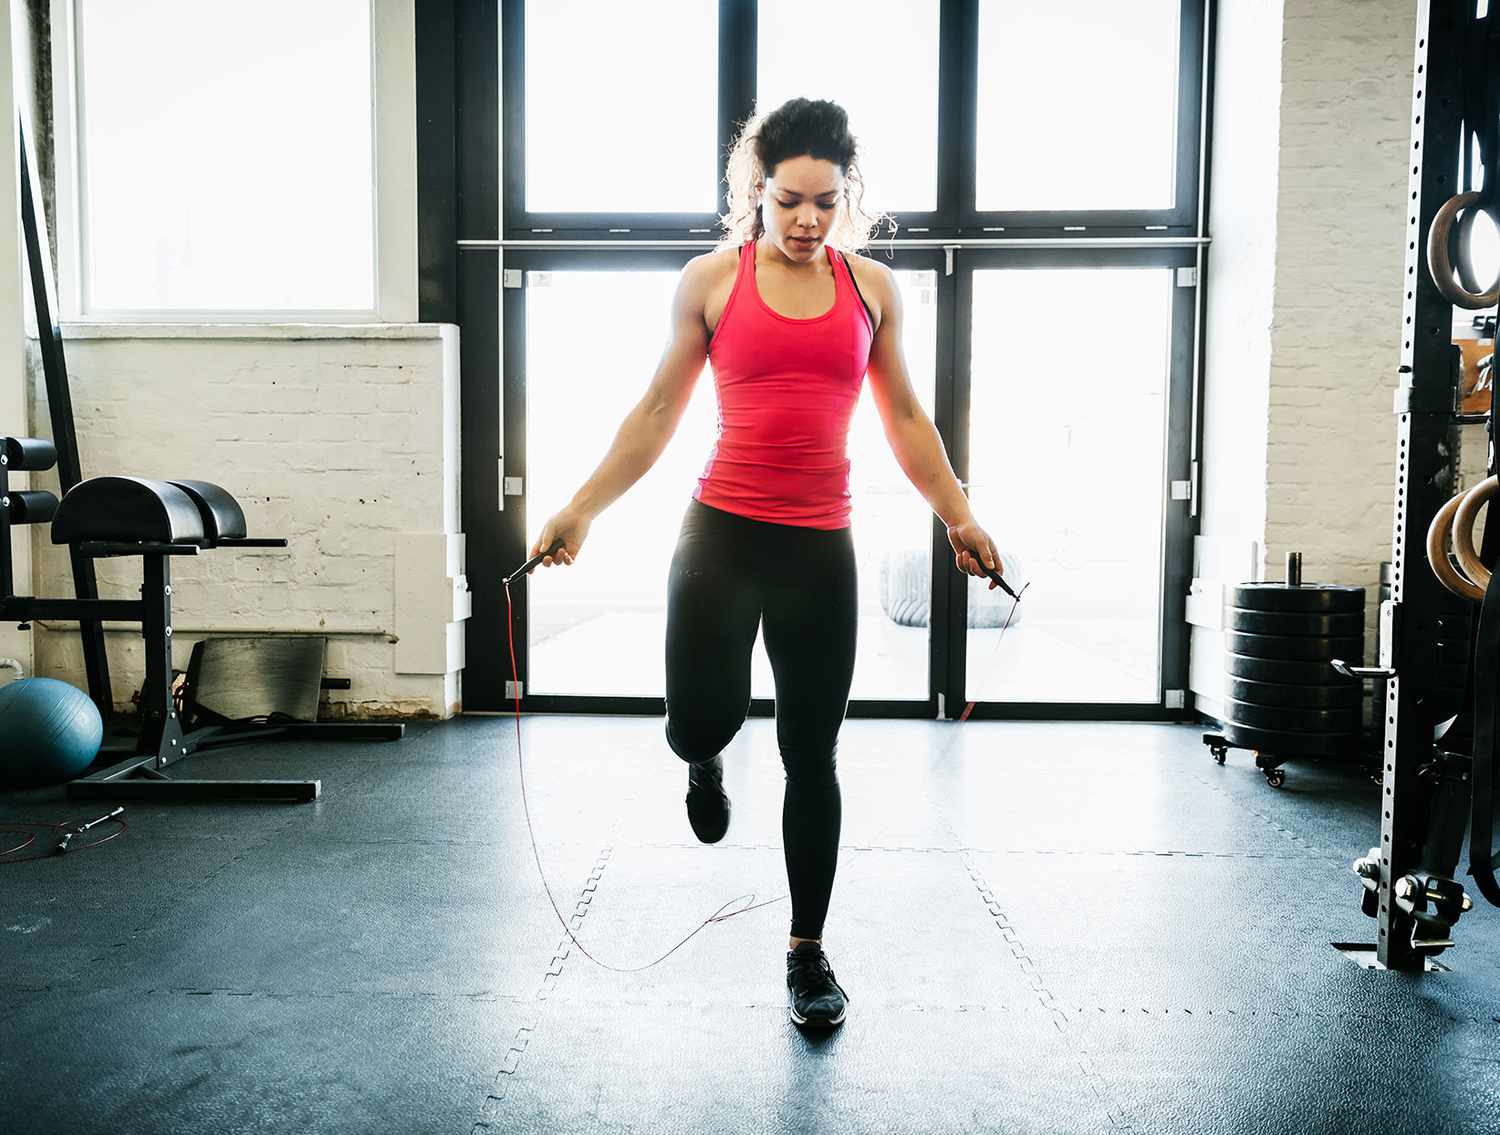 Ways to Burn More Calories While Working Out